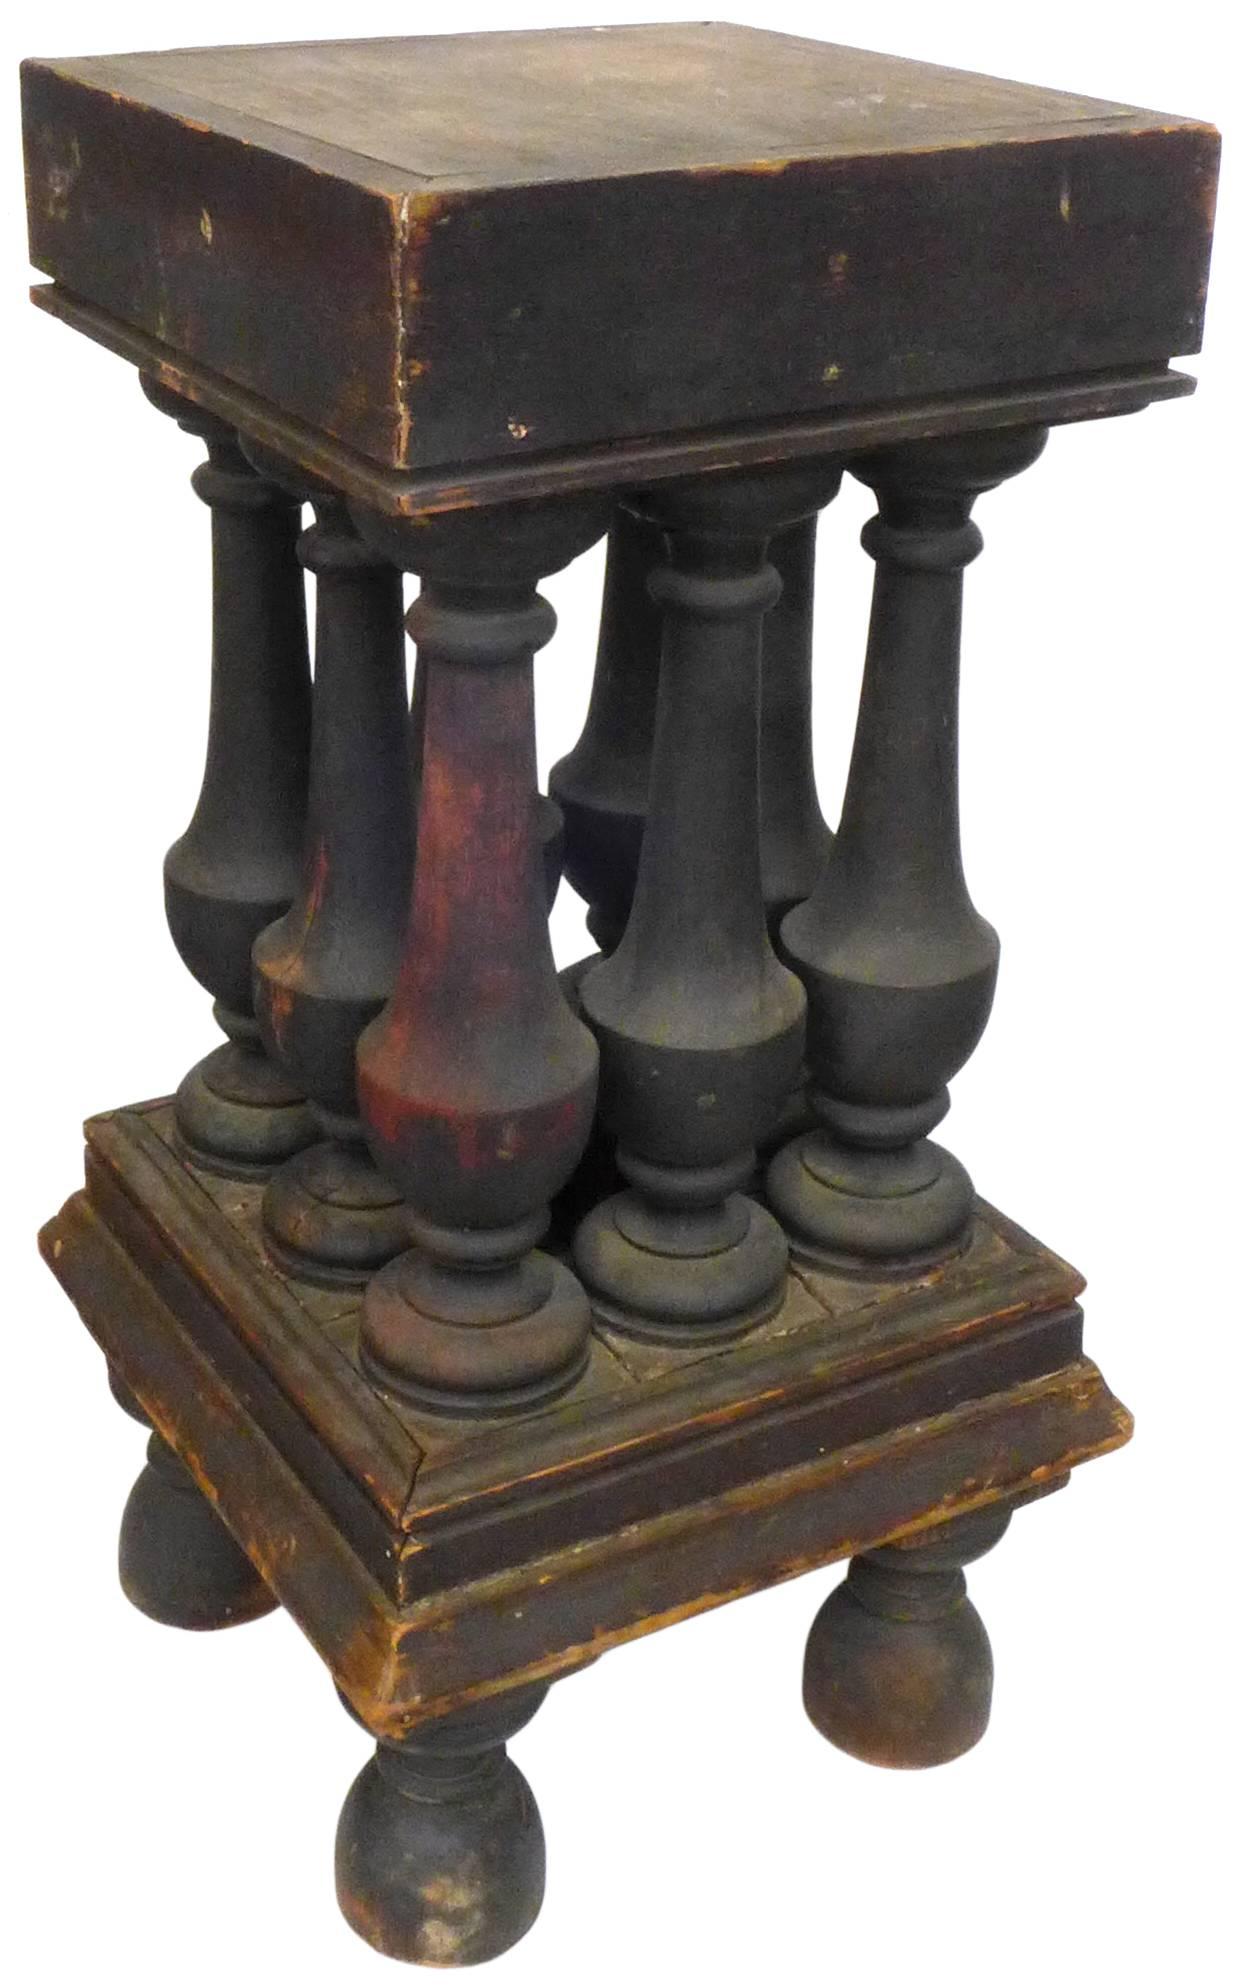 An extraordinary, turned-wood, Victorian stand. An alluring and curious construction in every aspect. A group of nine turned-wood posts holding a hefty surface; standing on four turned-wood legs. Great character with unusual scale and proportions.